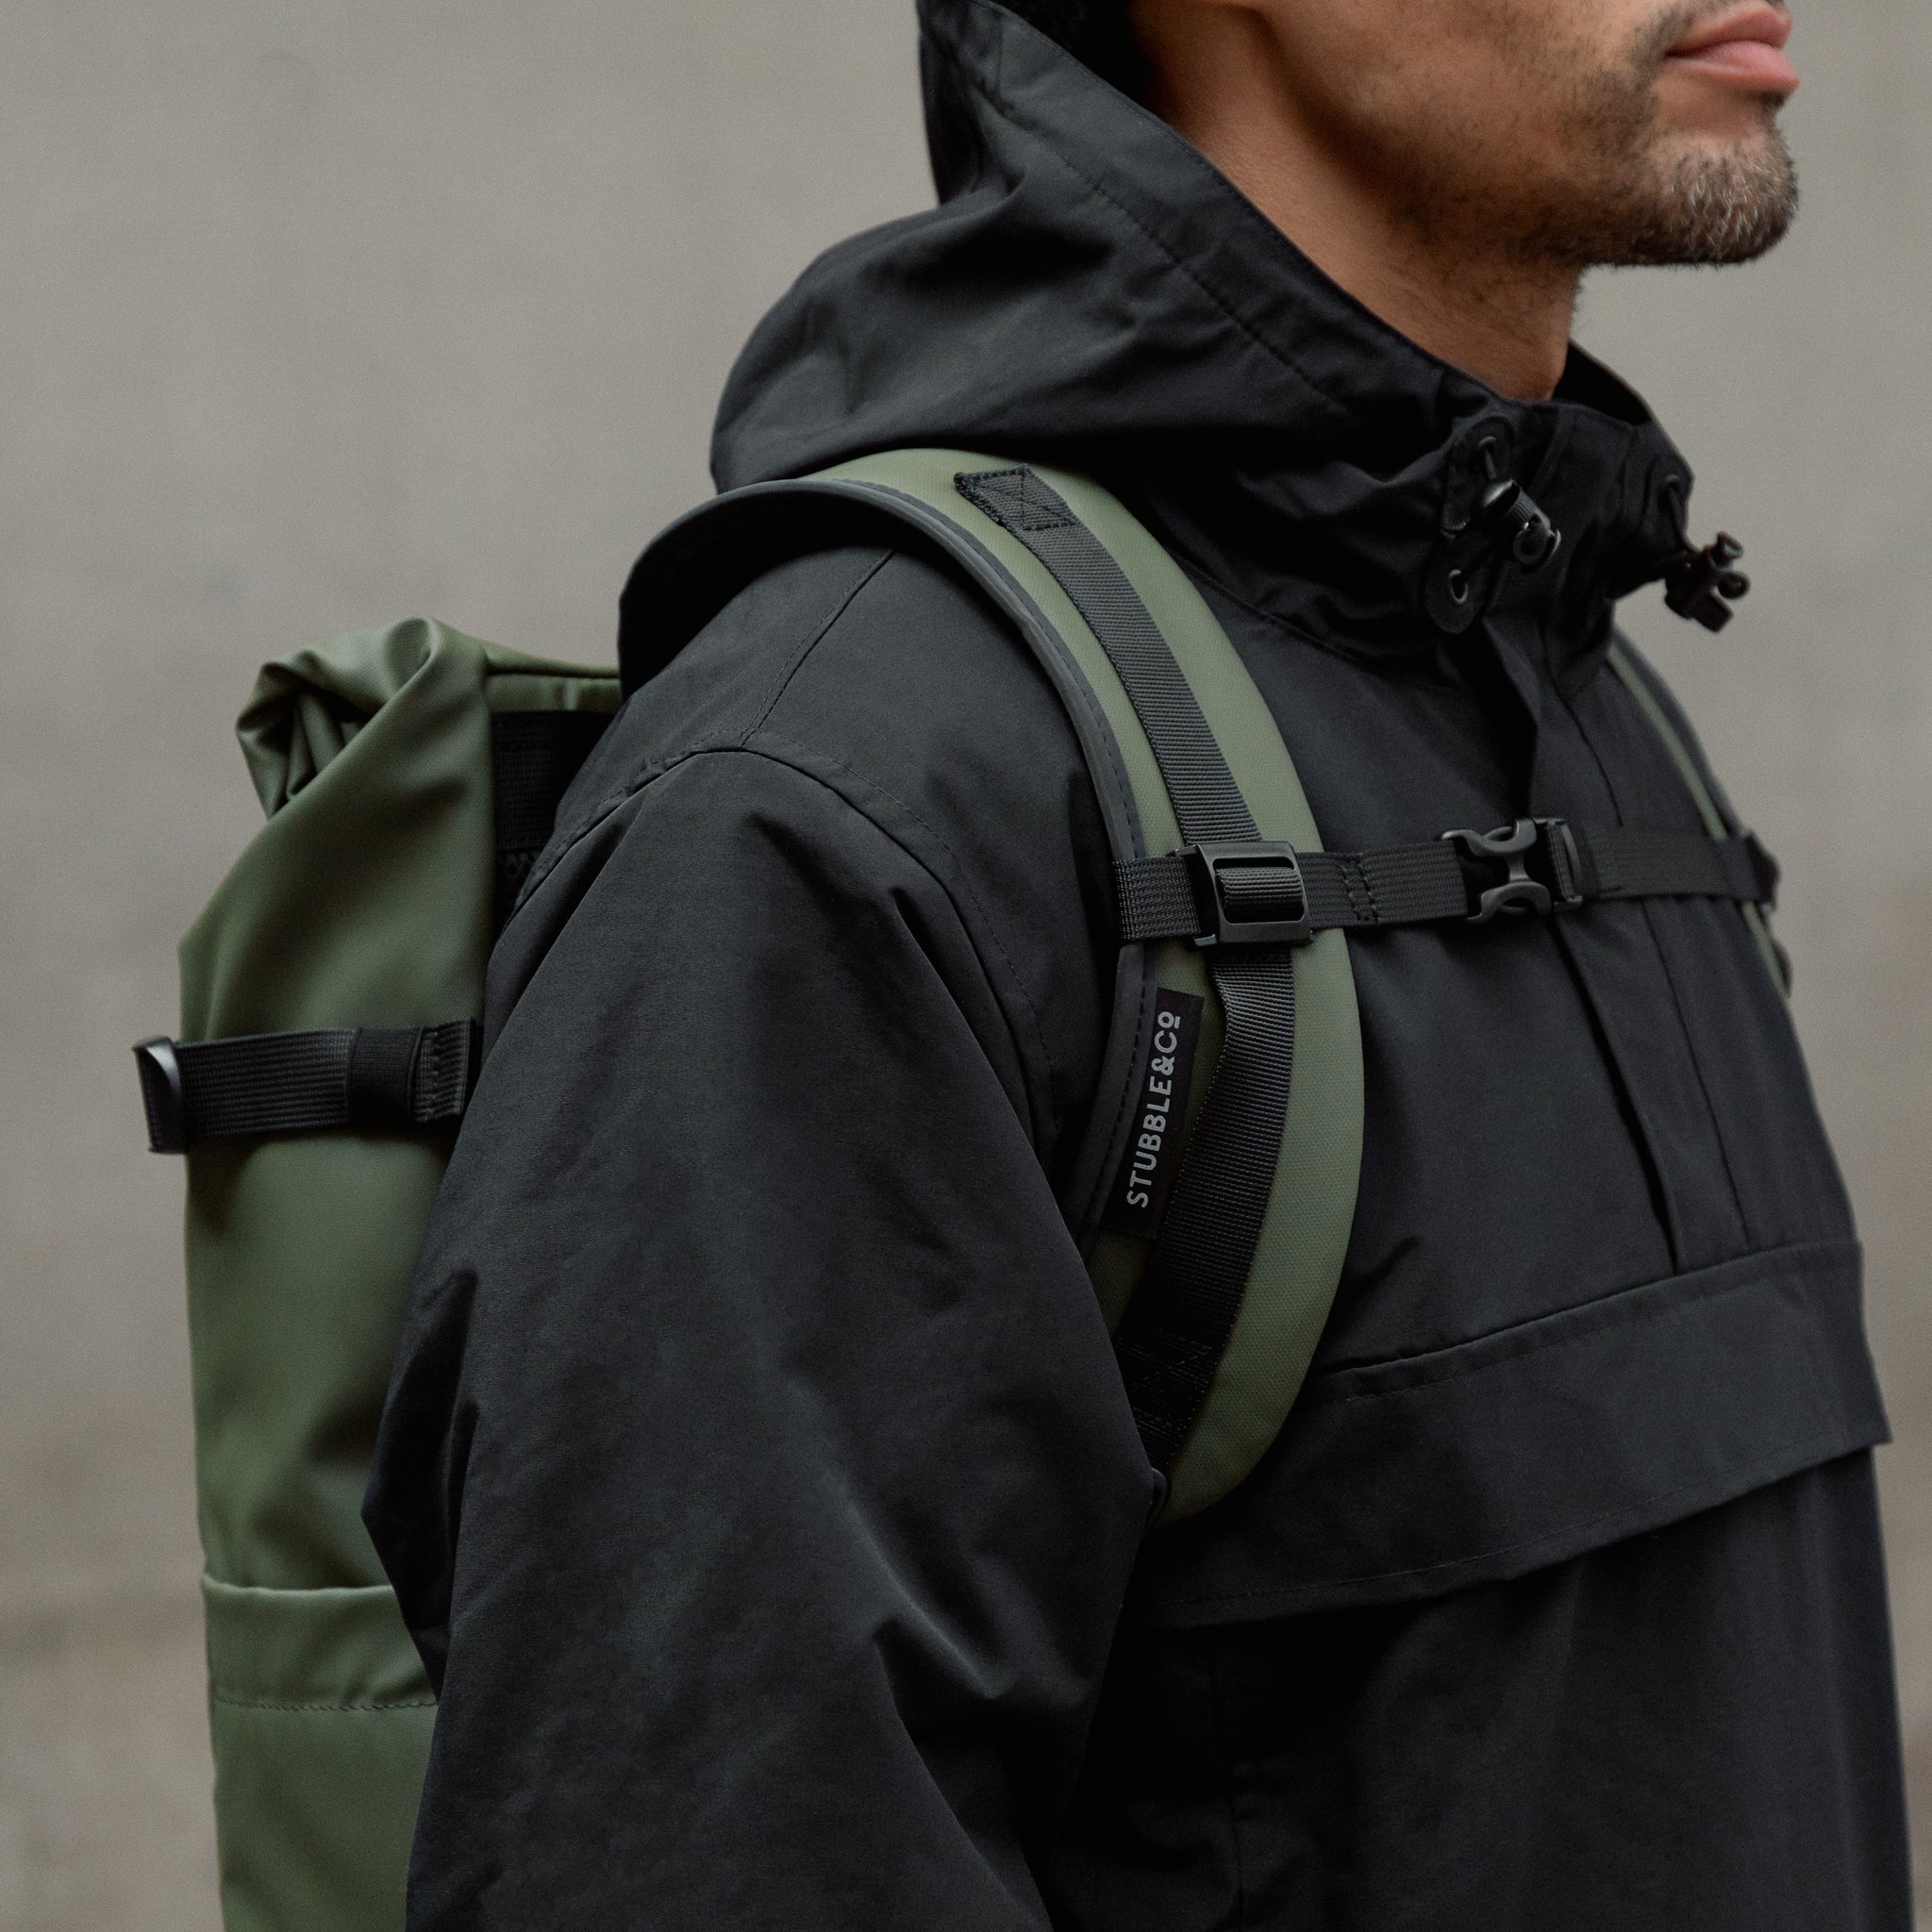 A close up on of the chest straps of an Urban Green Roll Top backpack on a mans back